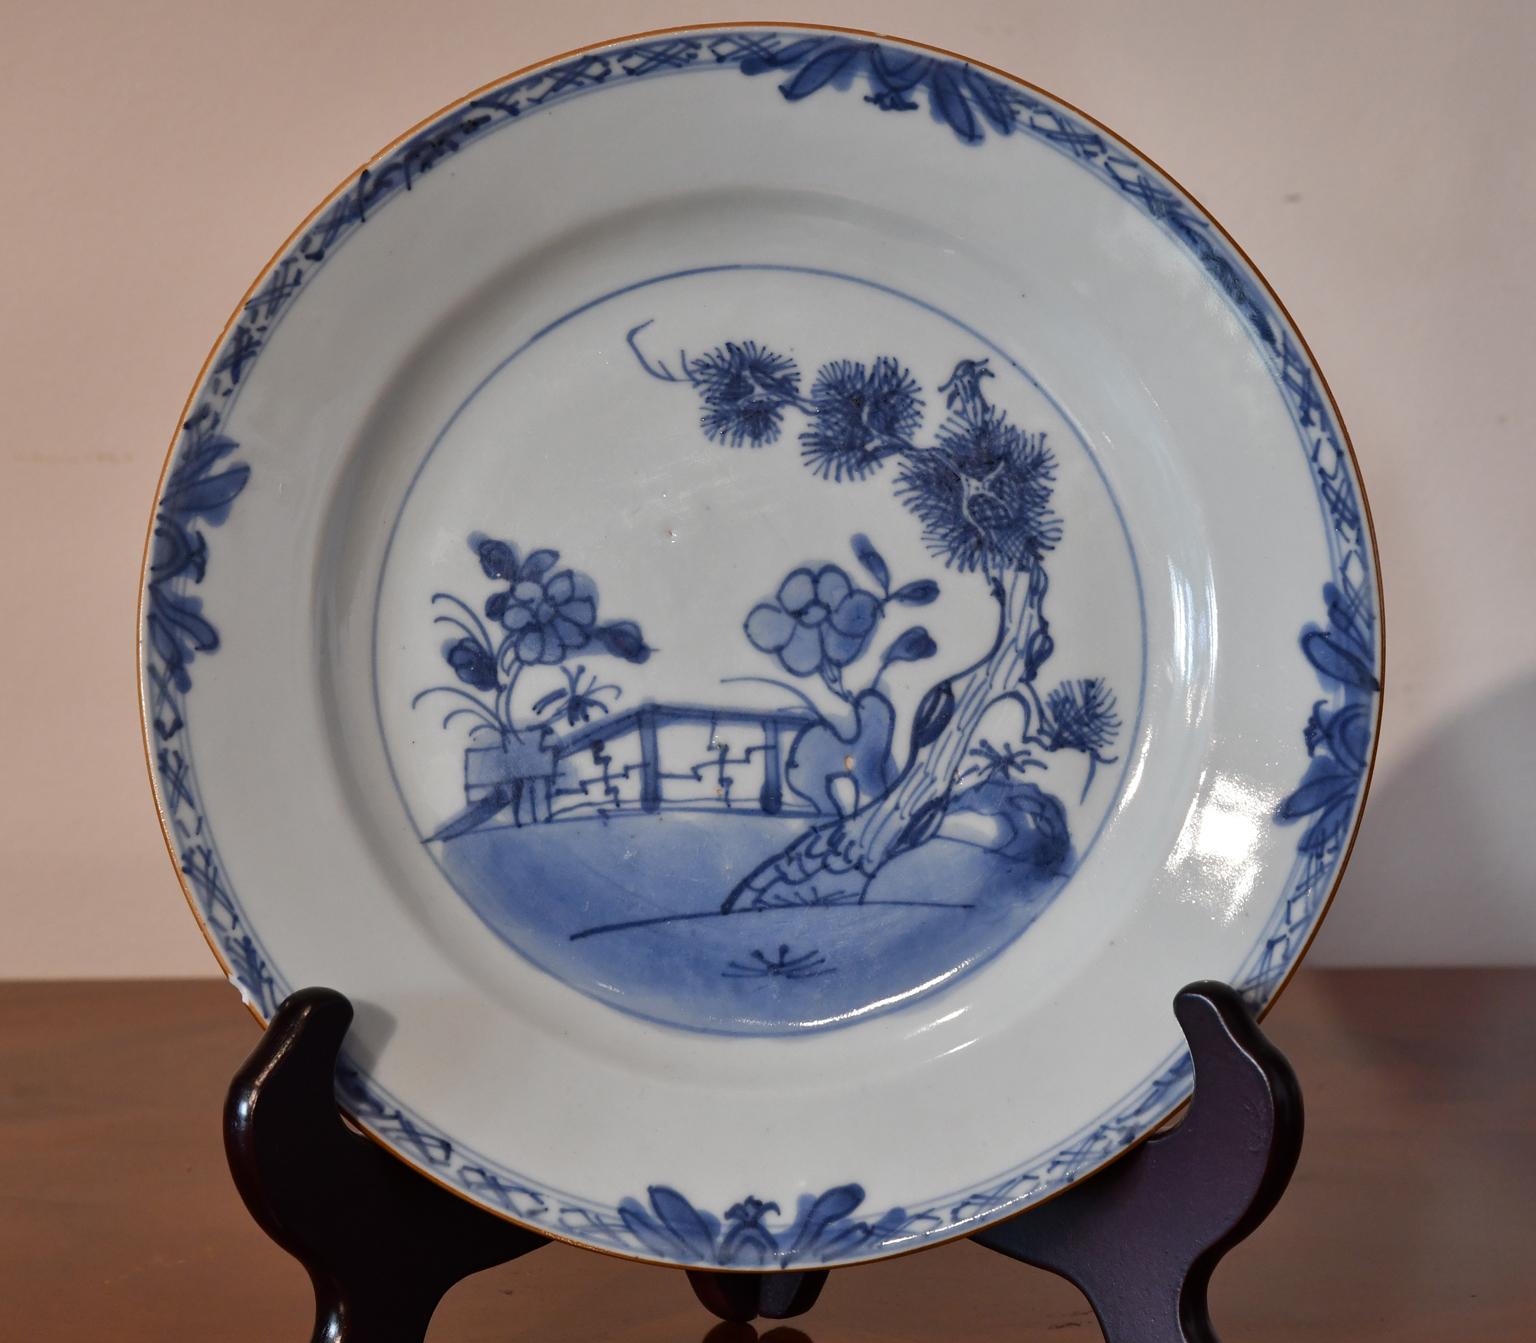 Glazed Pair of 18th Century Chinese Porcelain Blue & White Plates, Qing Qianlong